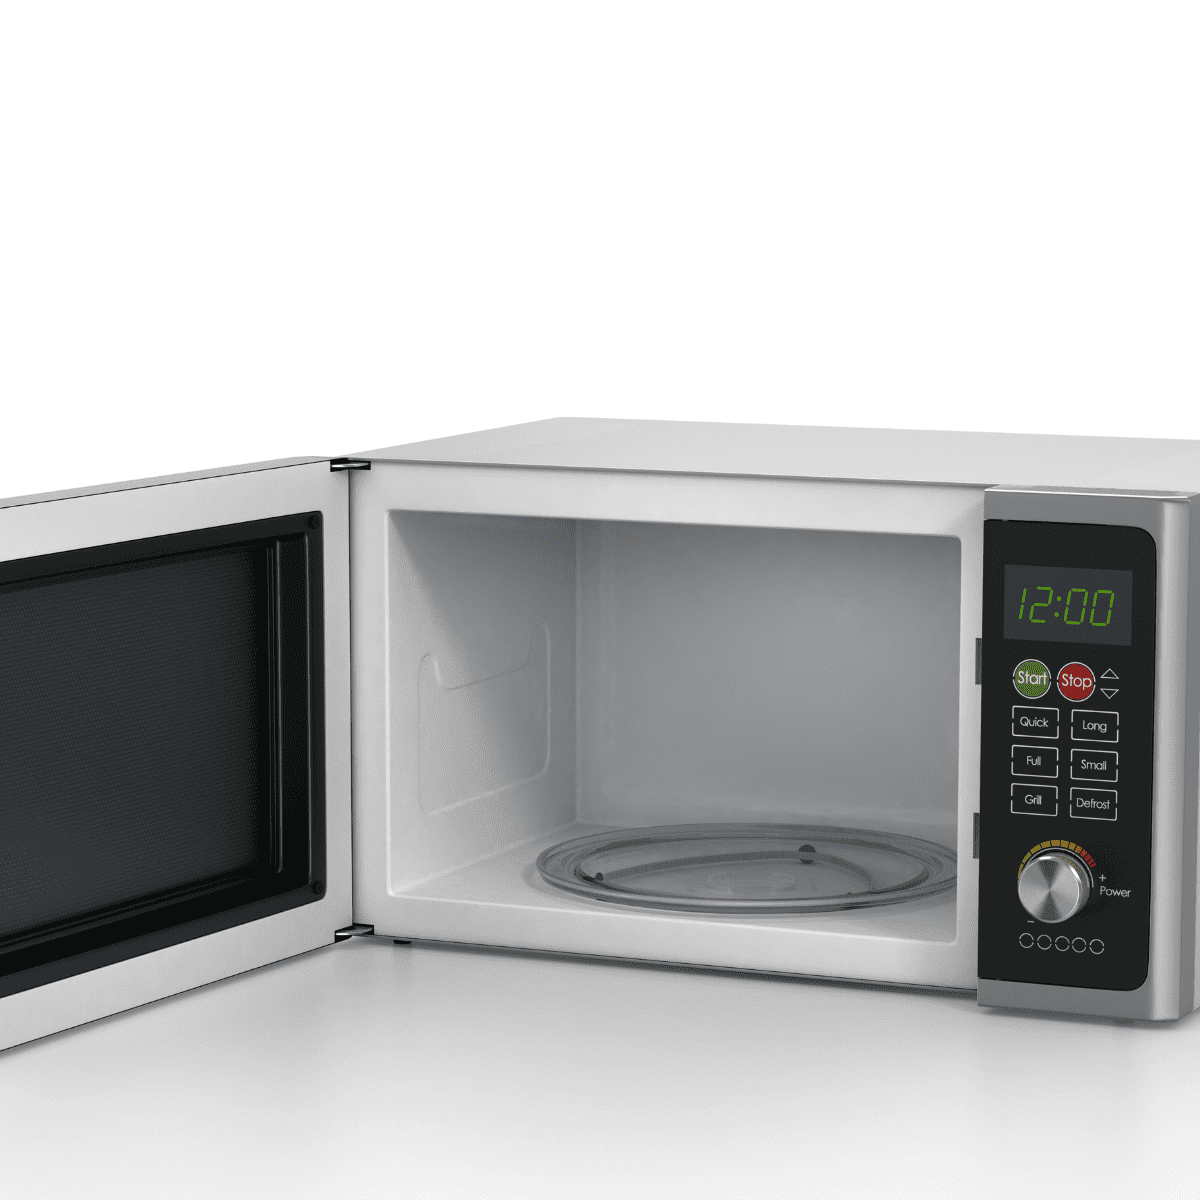 Air fryer microwave oven with the door open ready to cook.